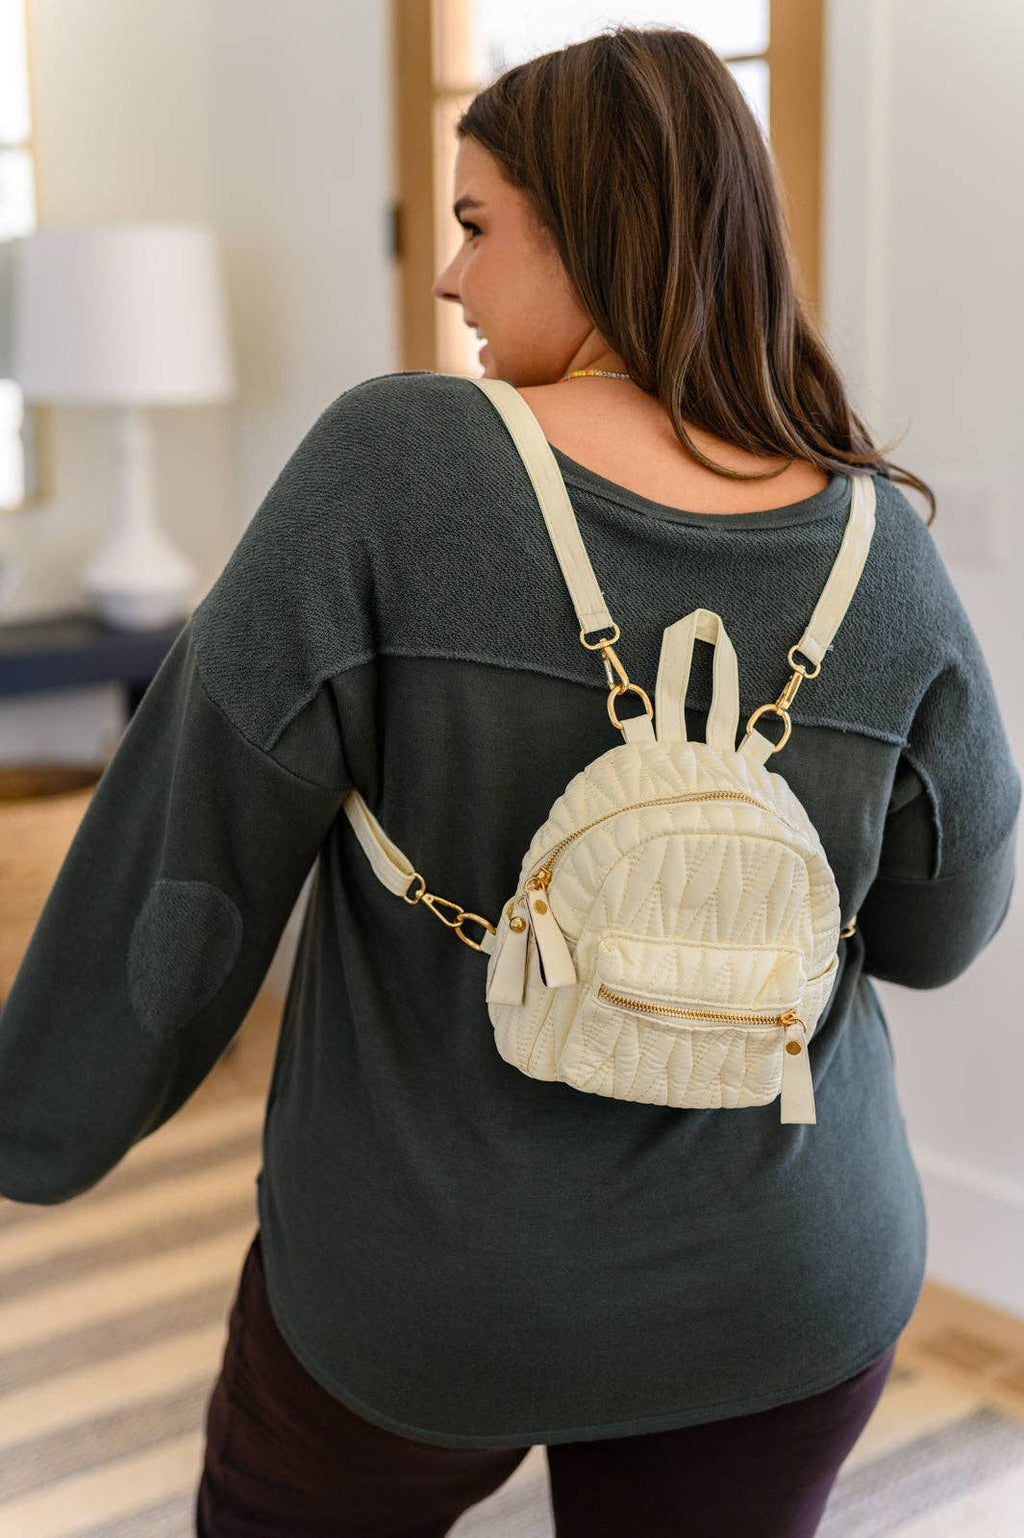 Take It With You Quilted Mini Backpack in Cream: OS